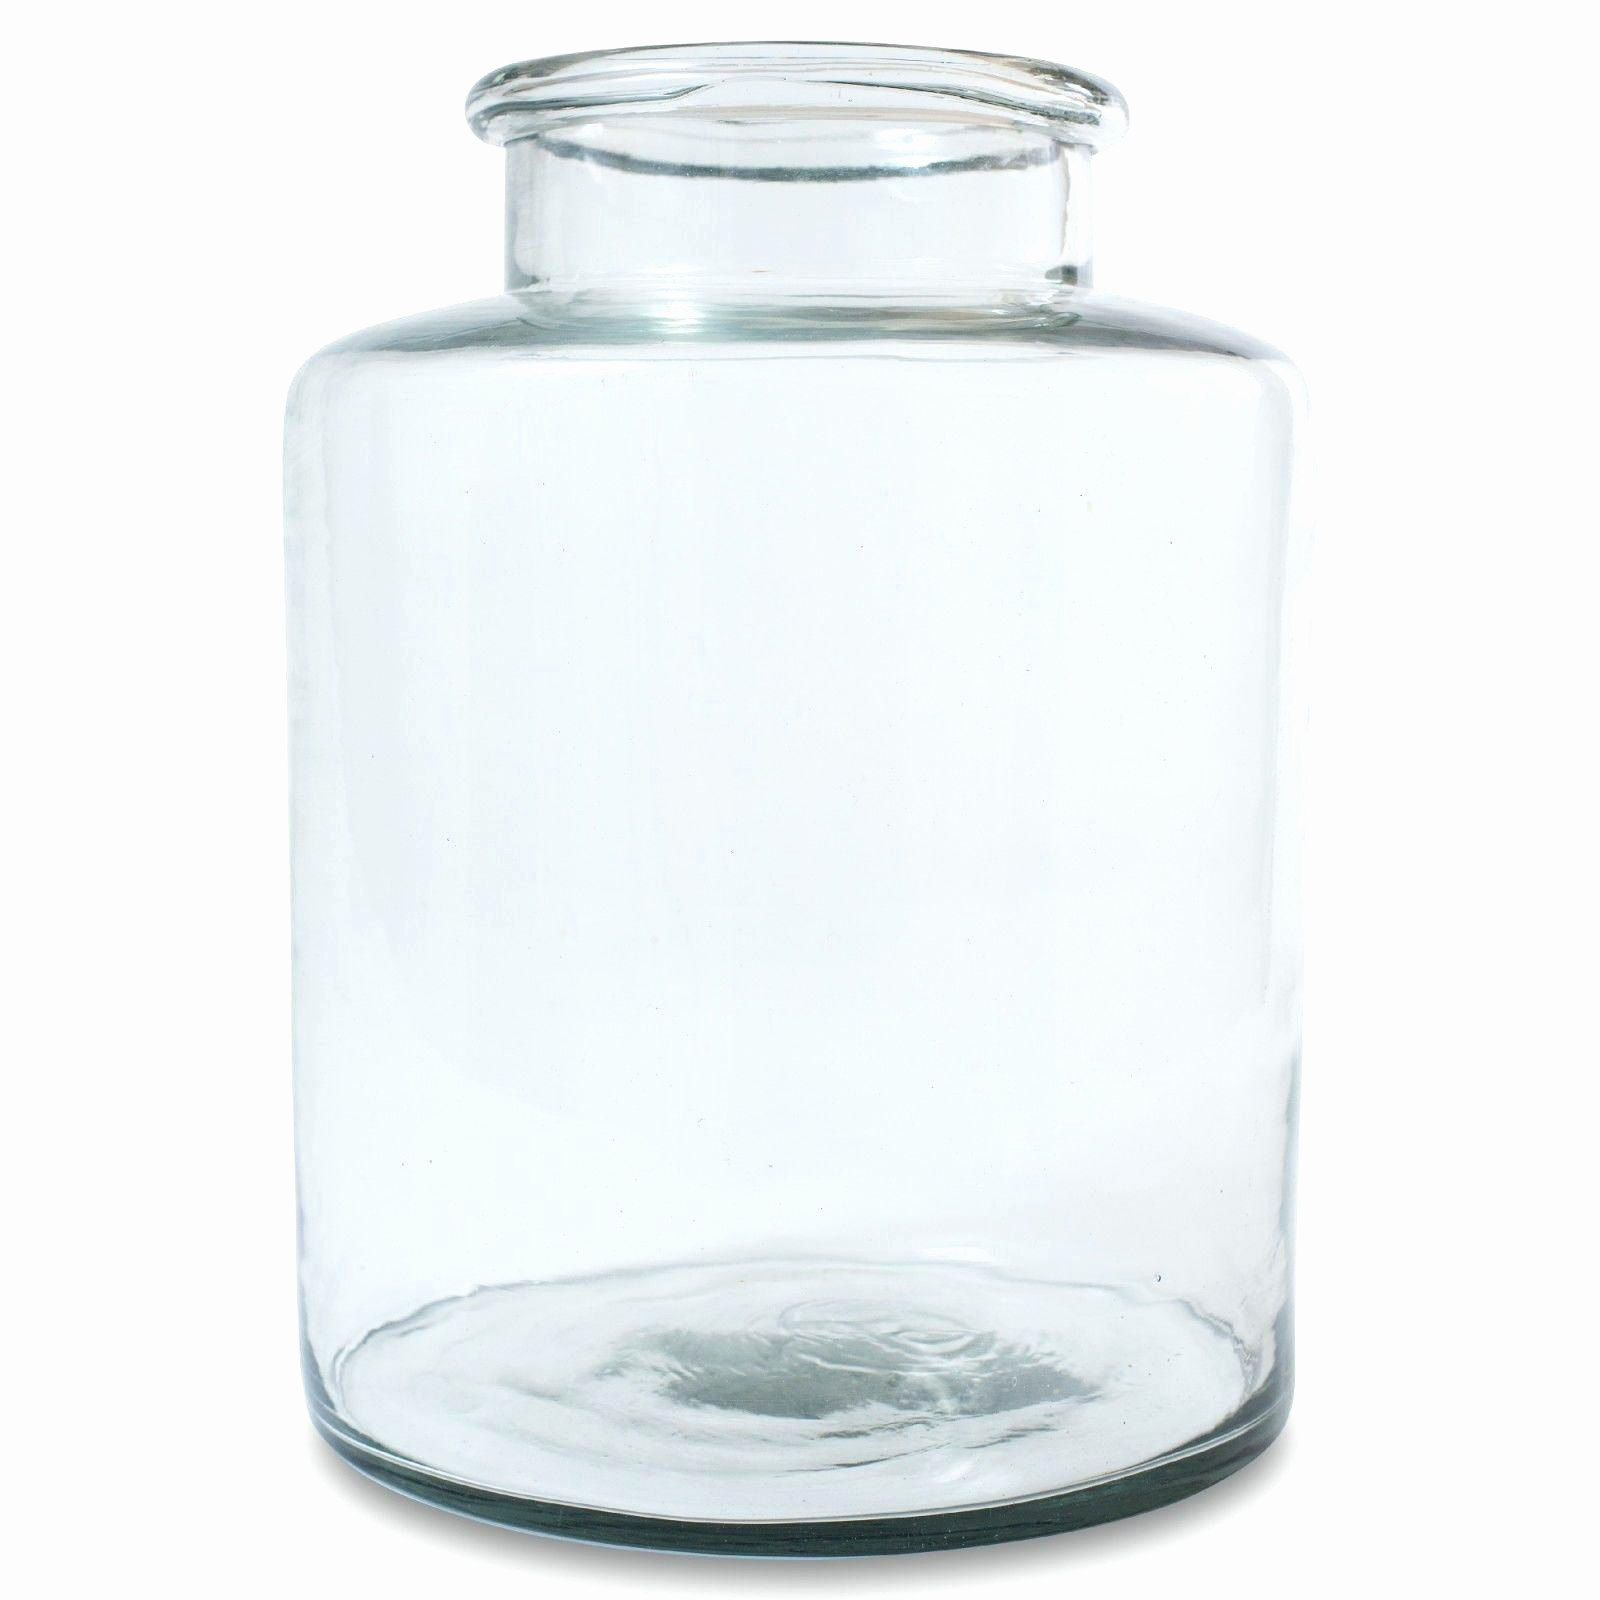 26 Great Large Brandy Snifter Vase 2024 free download large brandy snifter vase of 3 foot glass vase vase and cellar image avorcor com in gl vase with lid and cellar image avorcor